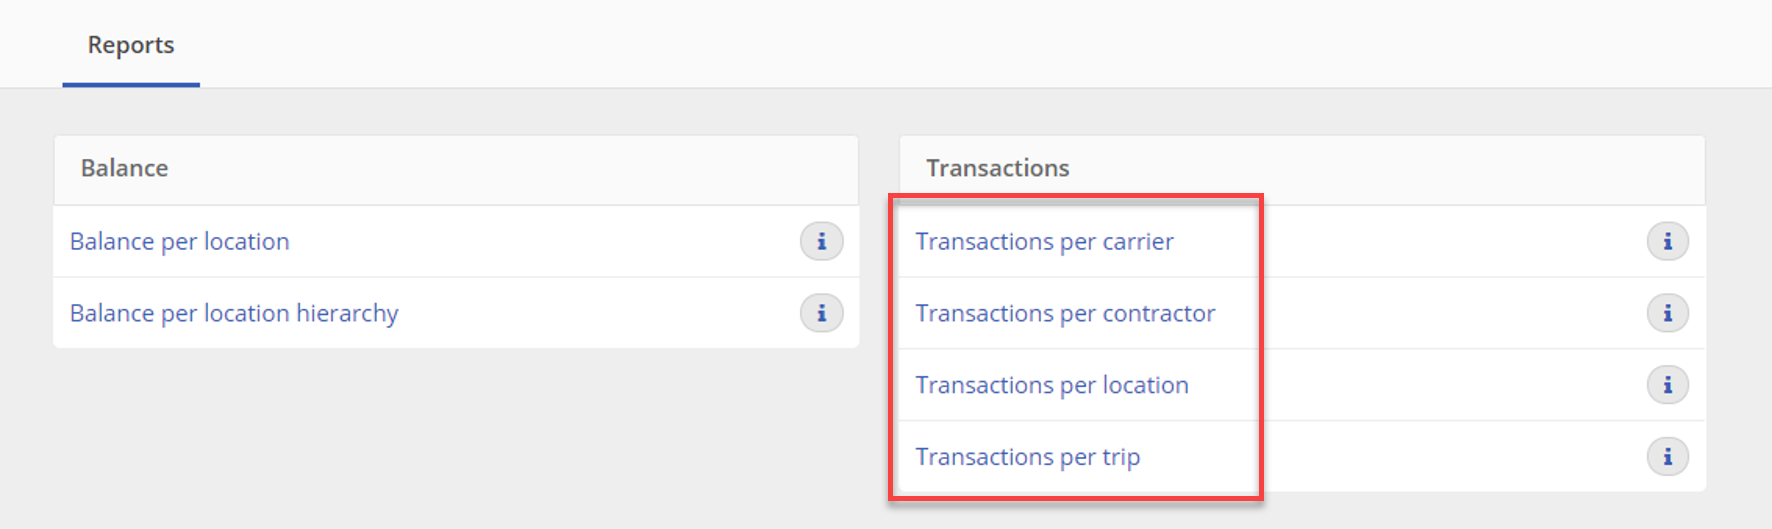 Transactions reports